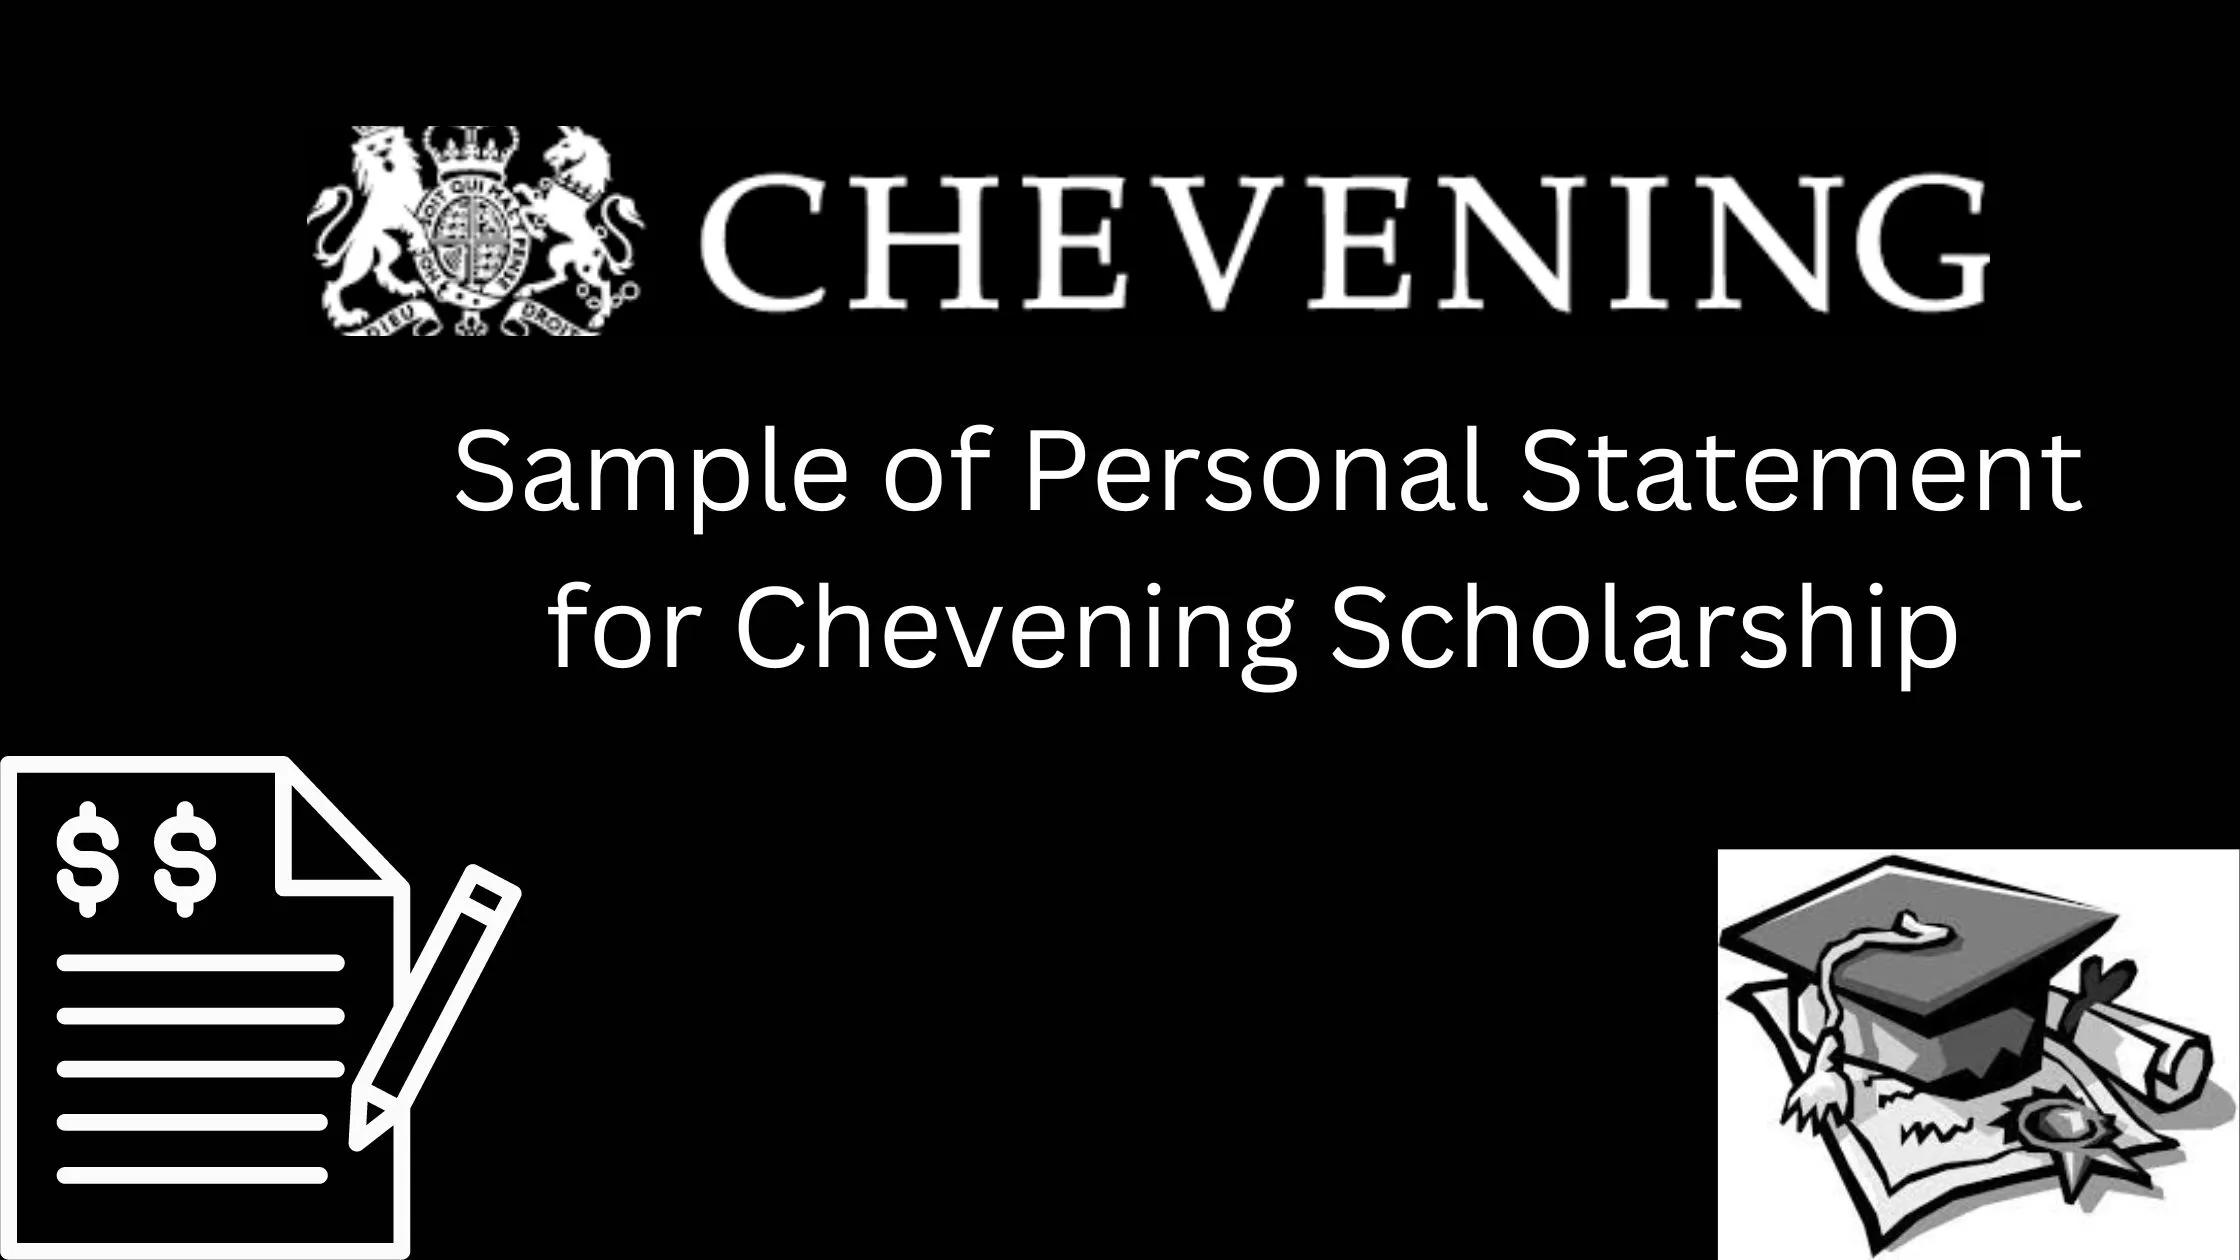 Sample of Personal Statement for Chevening Scholarship